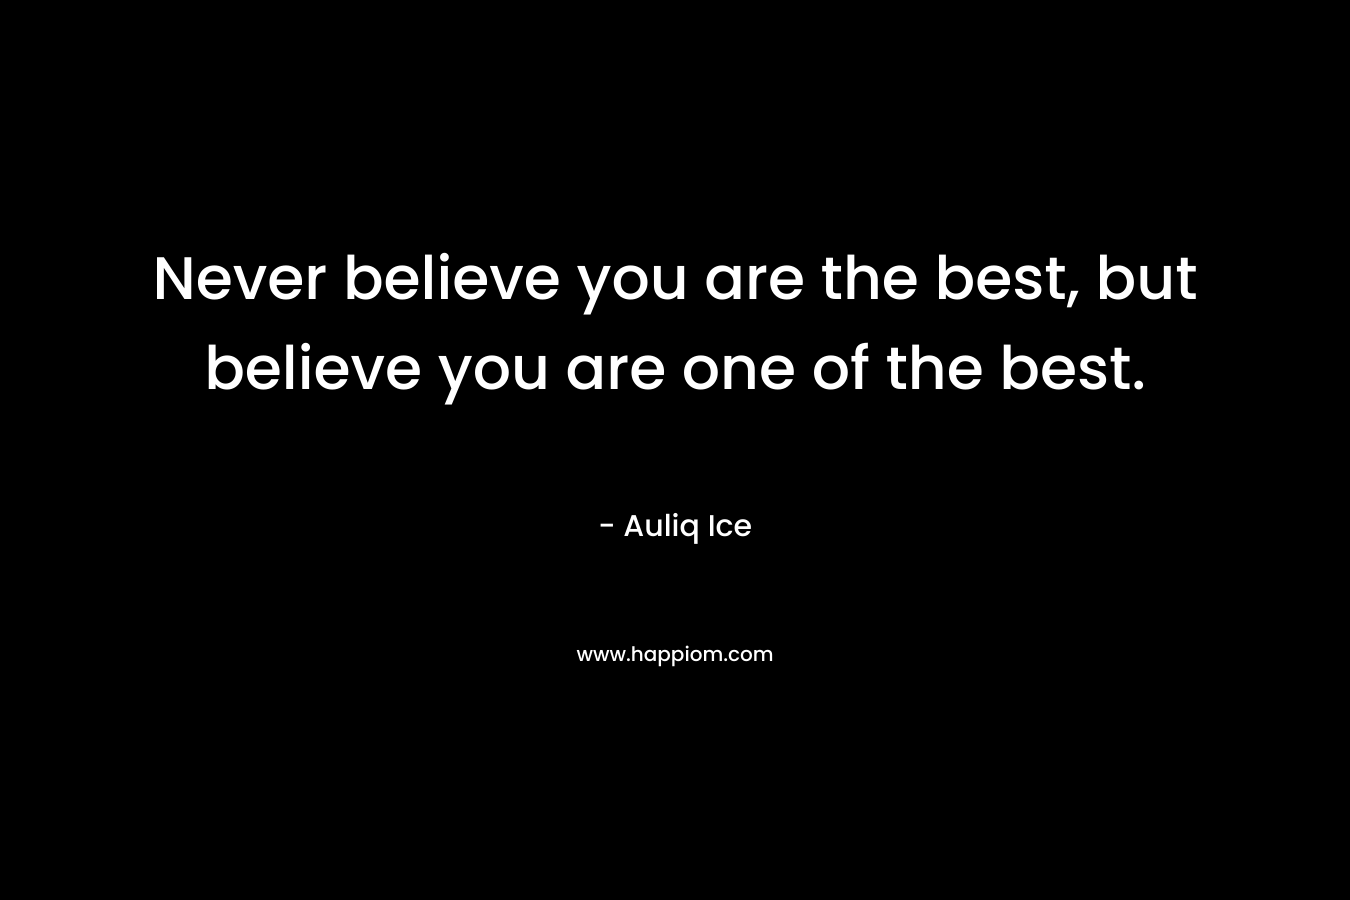 Never believe you are the best, but believe you are one of the best.